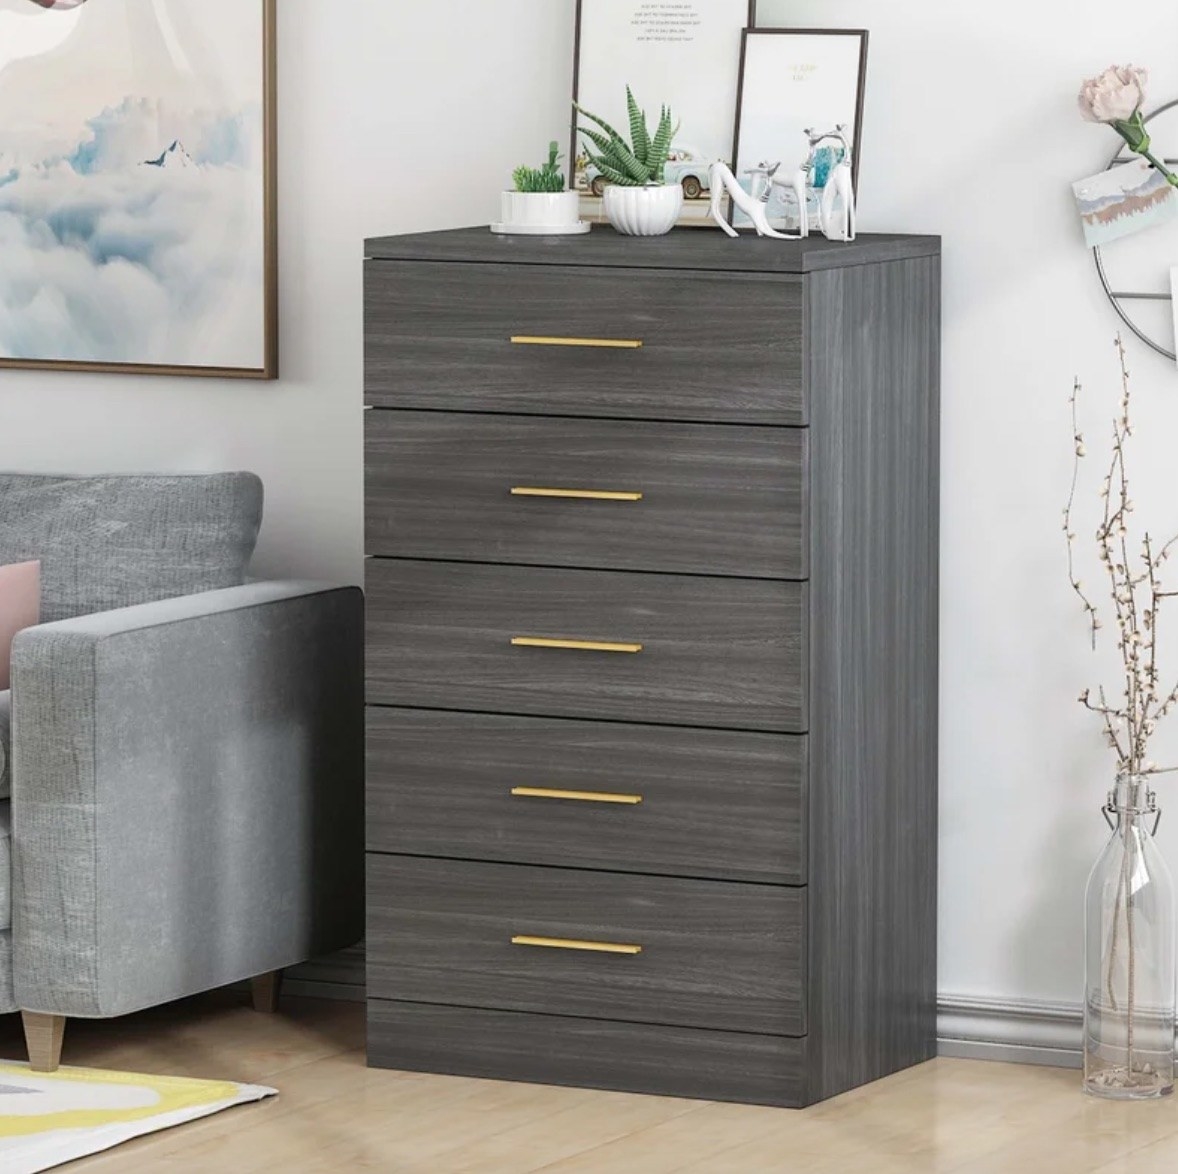 a tall charcoal chest of drawers with gold pulls in a living room, with plants and decor on top